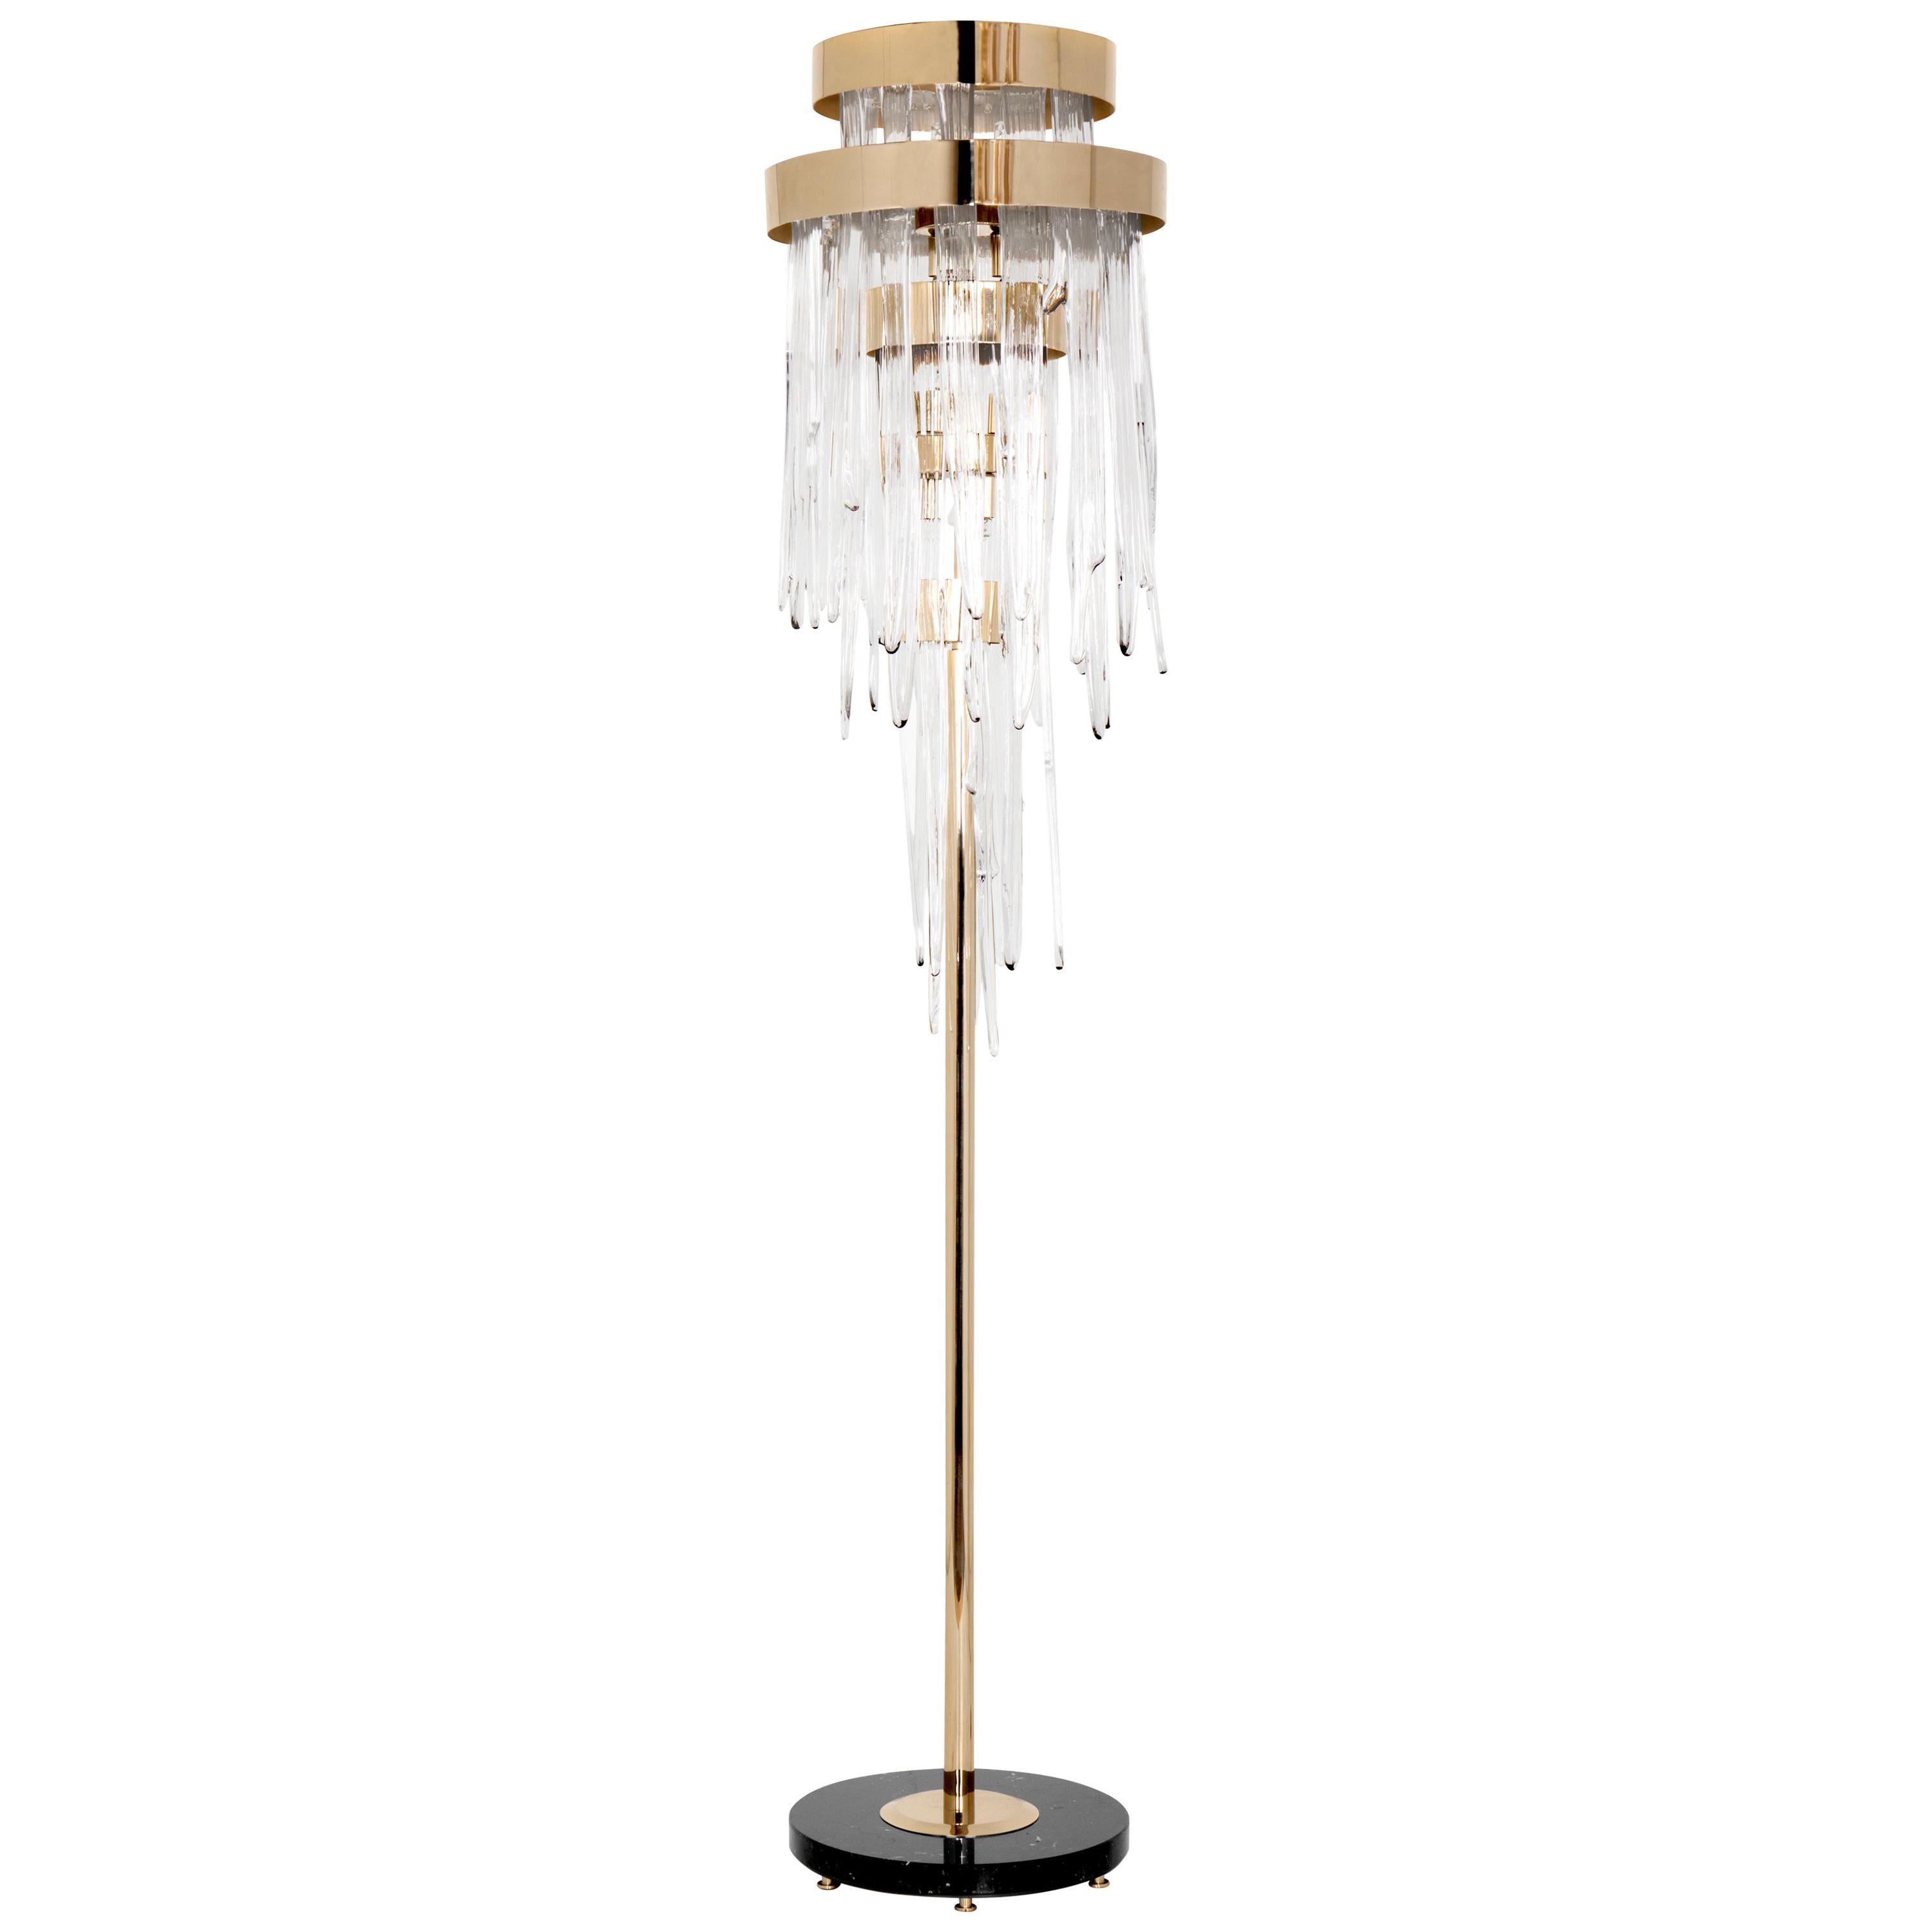 Babel Floor Lamp with Brass, Marble, and Crystal Glass Details For Sale